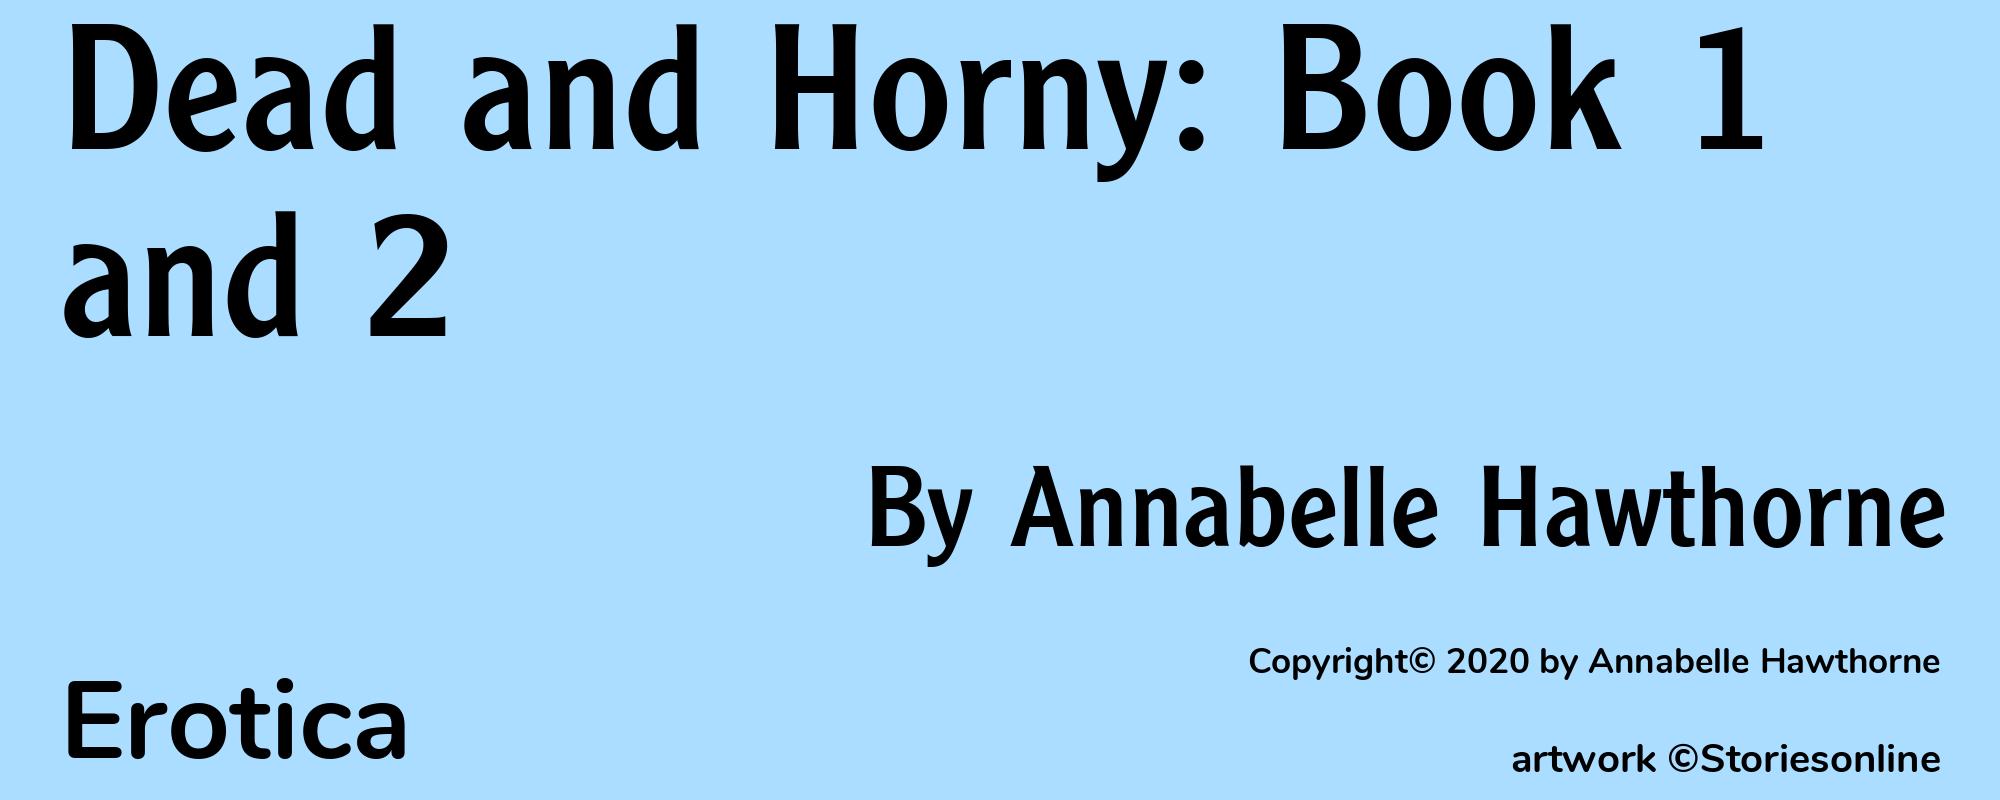 Dead and Horny: Book 1 and 2 - Cover